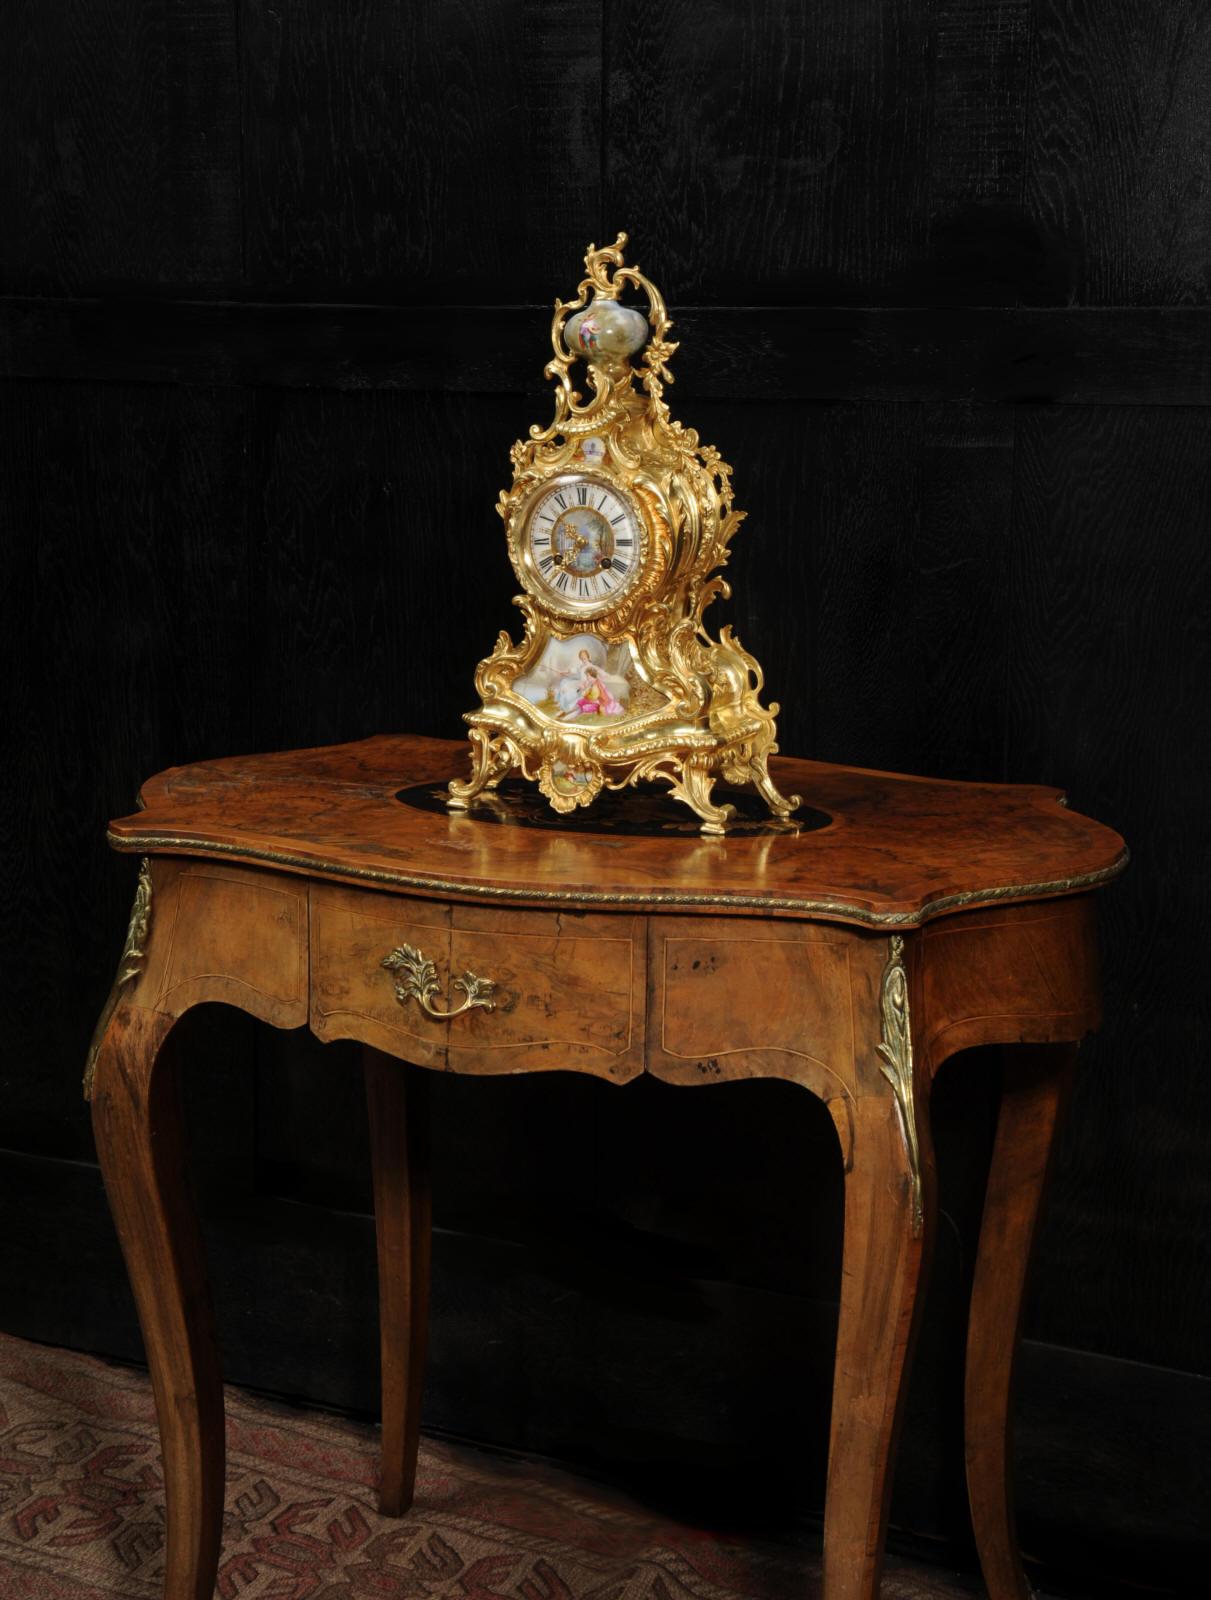 19th Century Japy Freres Ormolu and Sevres Porcelain Antique French Clock